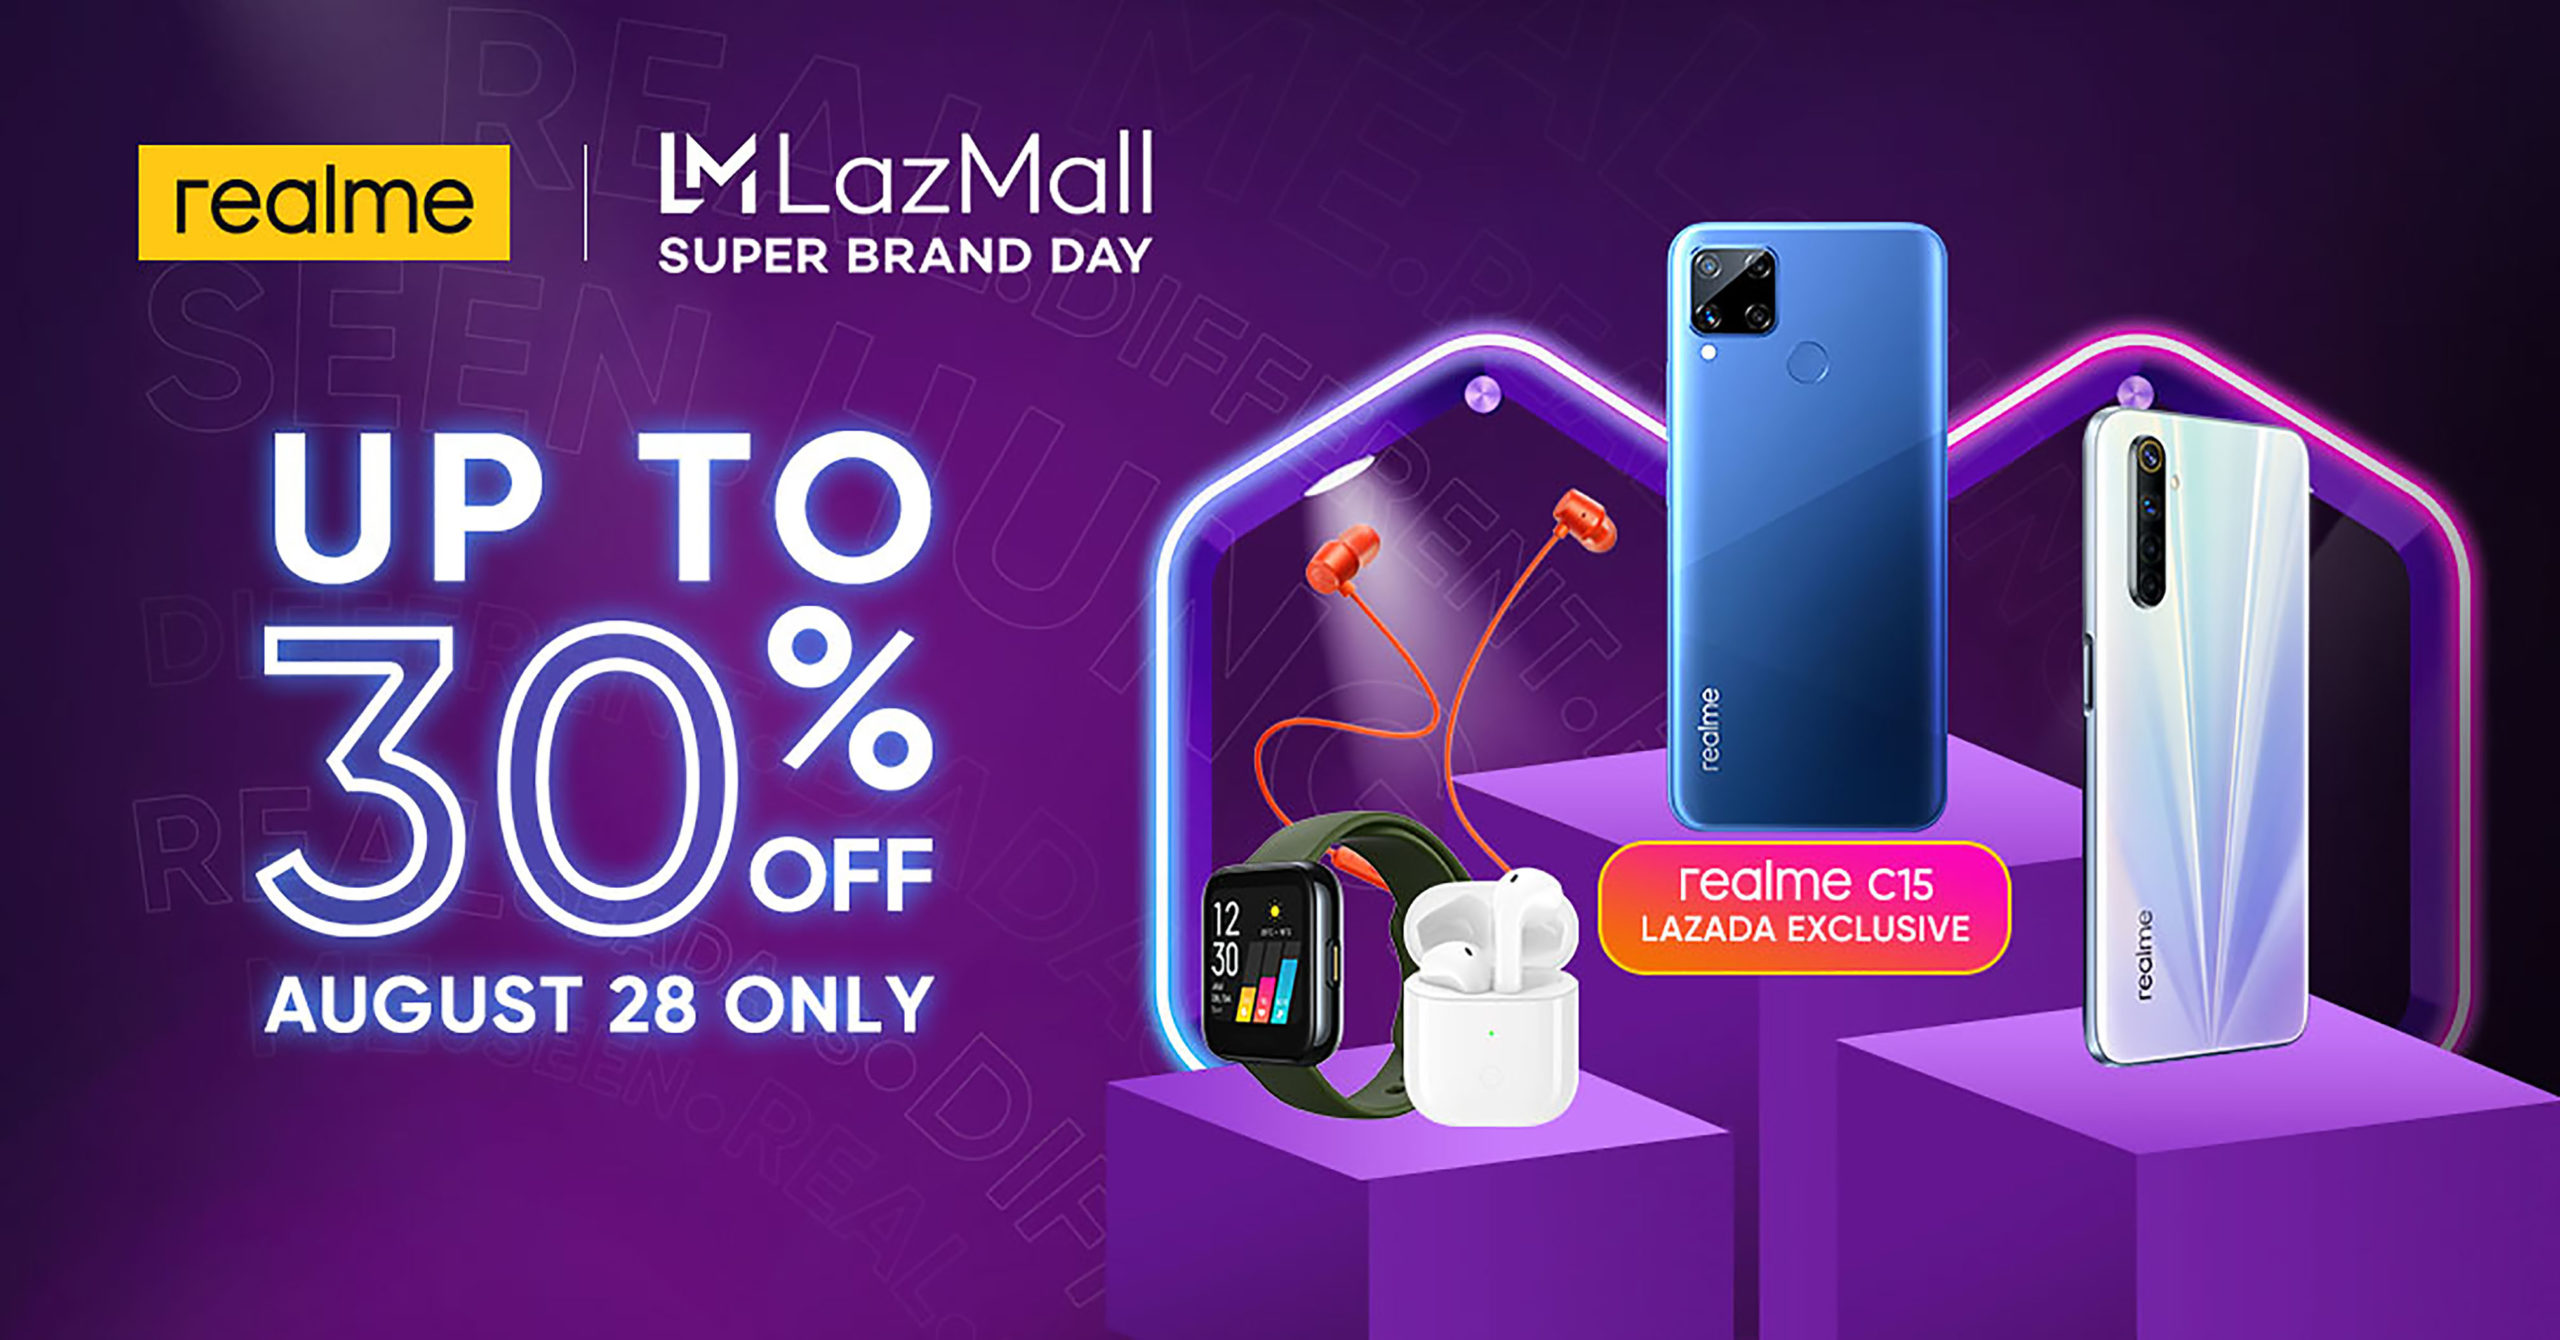 realme PH culminates month-long Fanfest on August 28  with a music festival and a Lazada sale